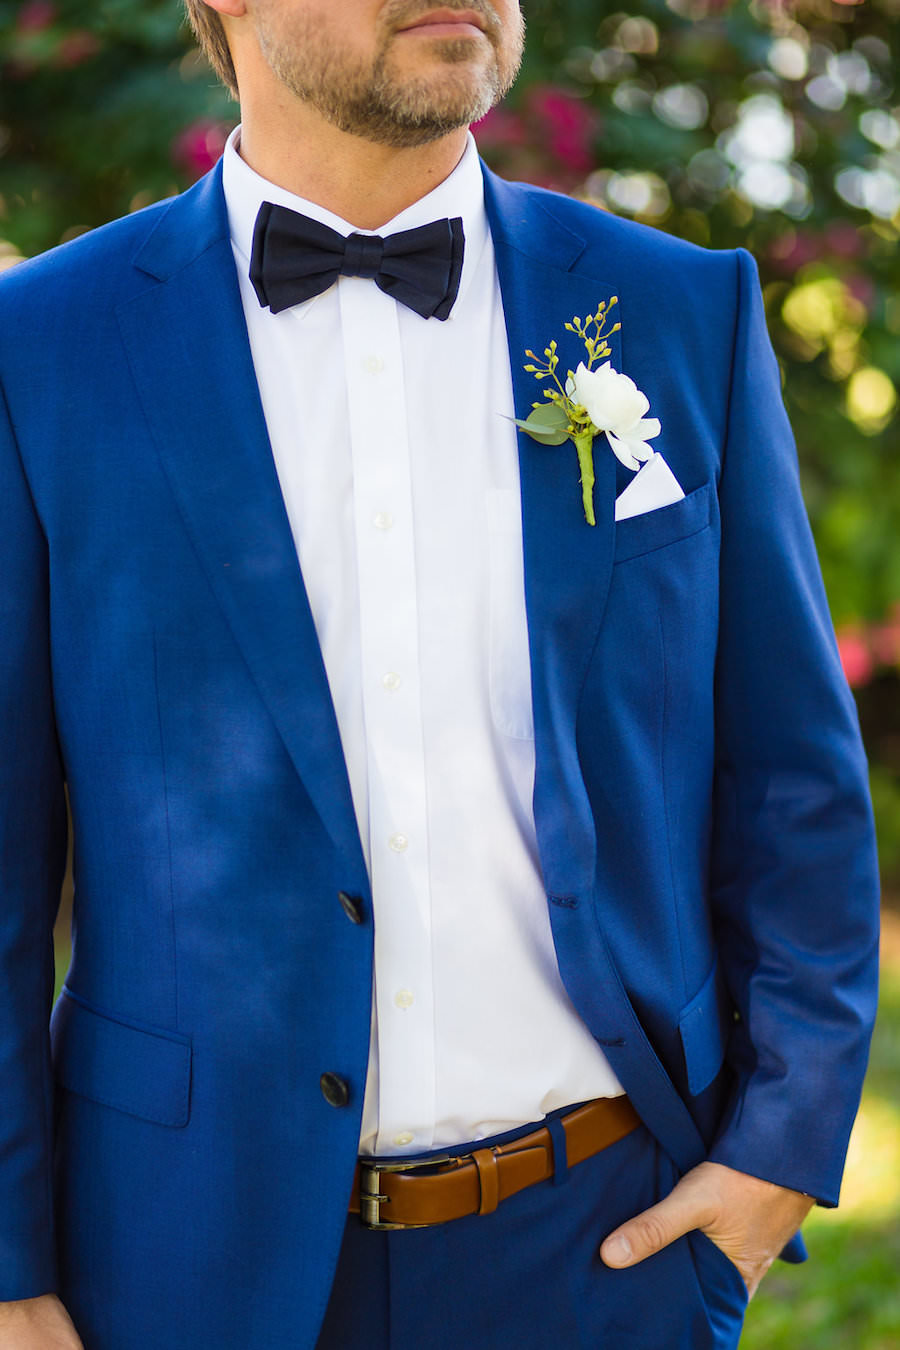 Groom Wedding Day Portrait in Blue Suit with Navy Bowtie and Ivory Floral Boutonniere | Tampa Wedding Photographer Kera Photography